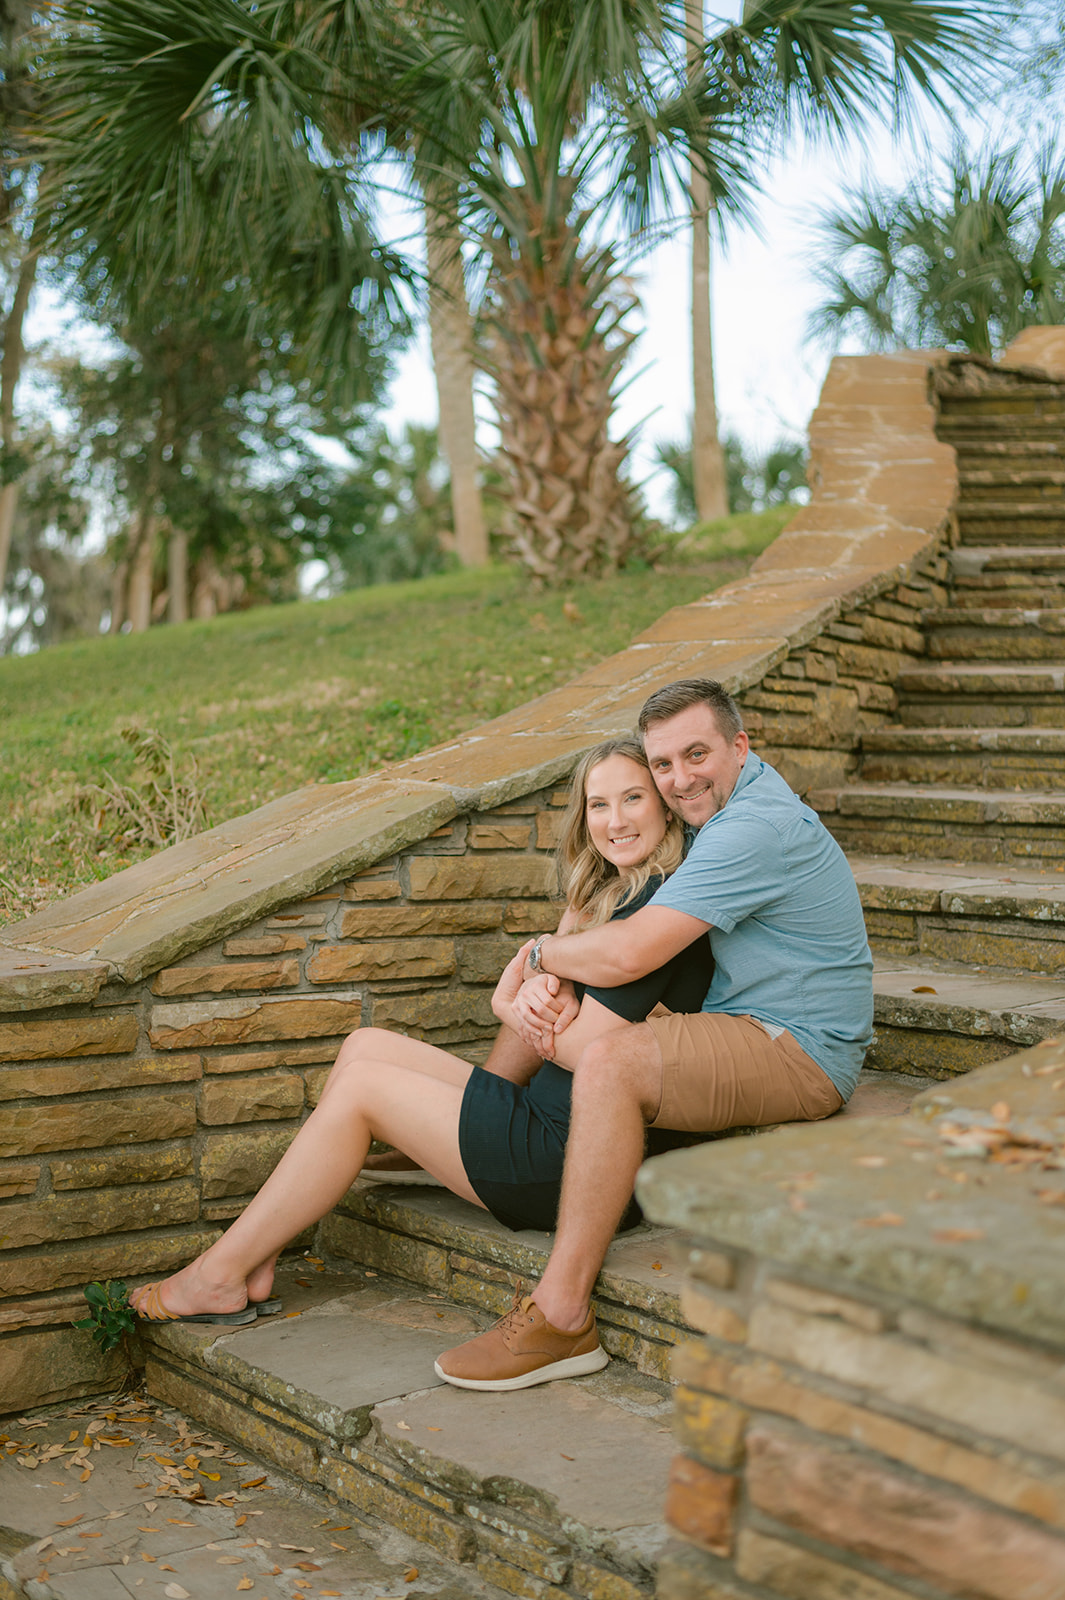 "Intimate and romantic engagement photography at Philippe Park"
